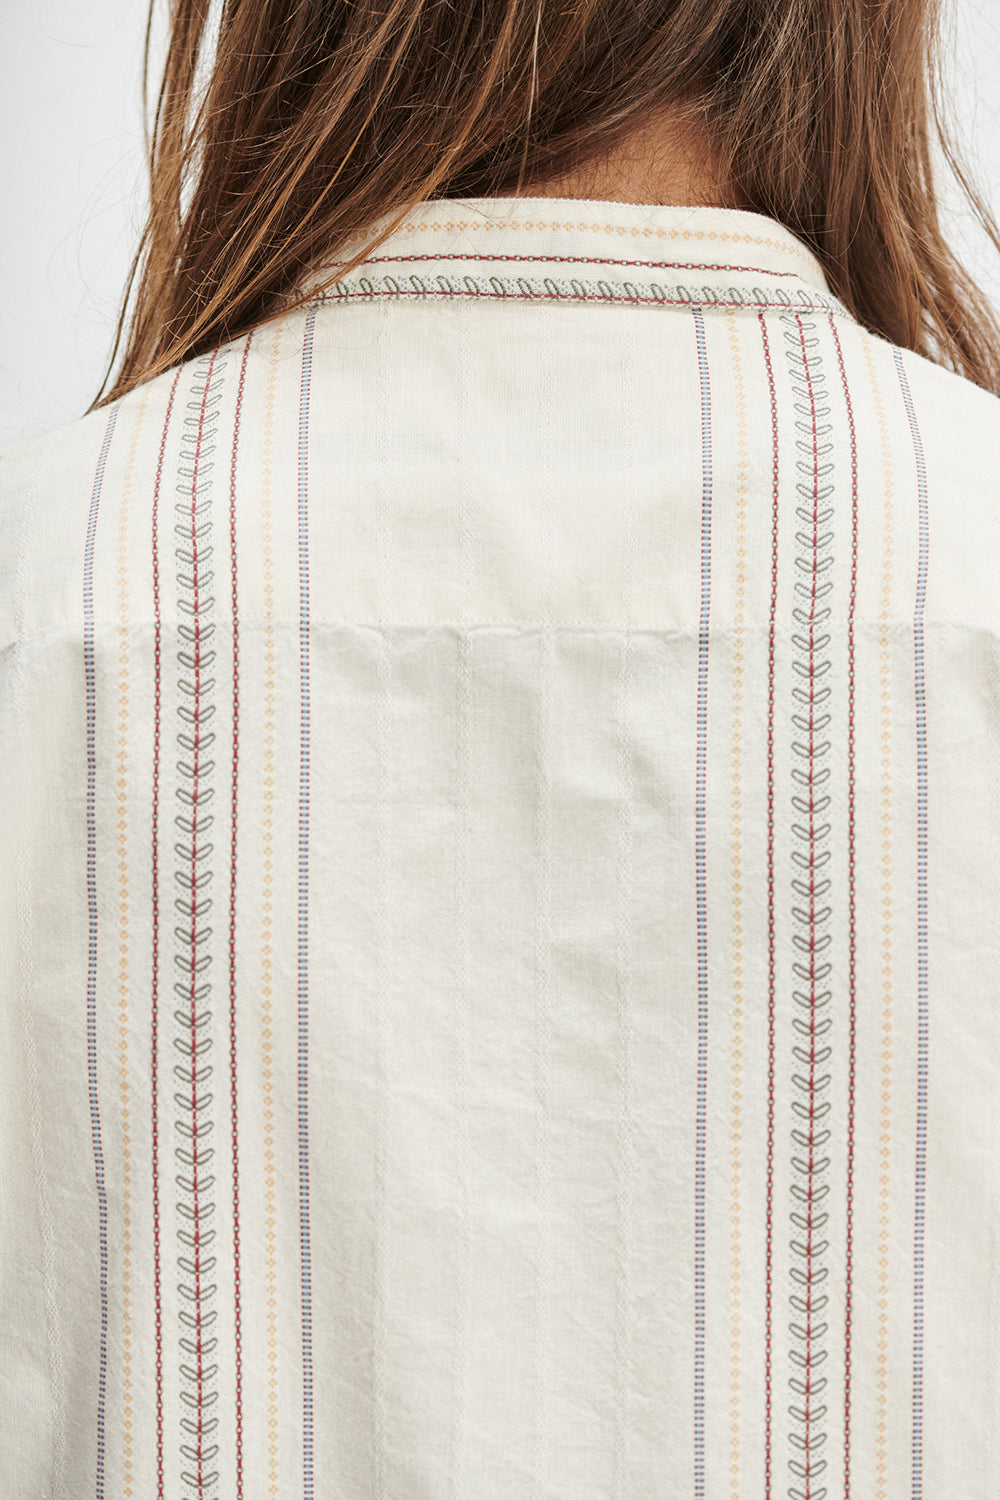 Zen Shirt in Cream White with Folkloric Striped Motifs in Red, Yellow and Grey Portuguese Cotton